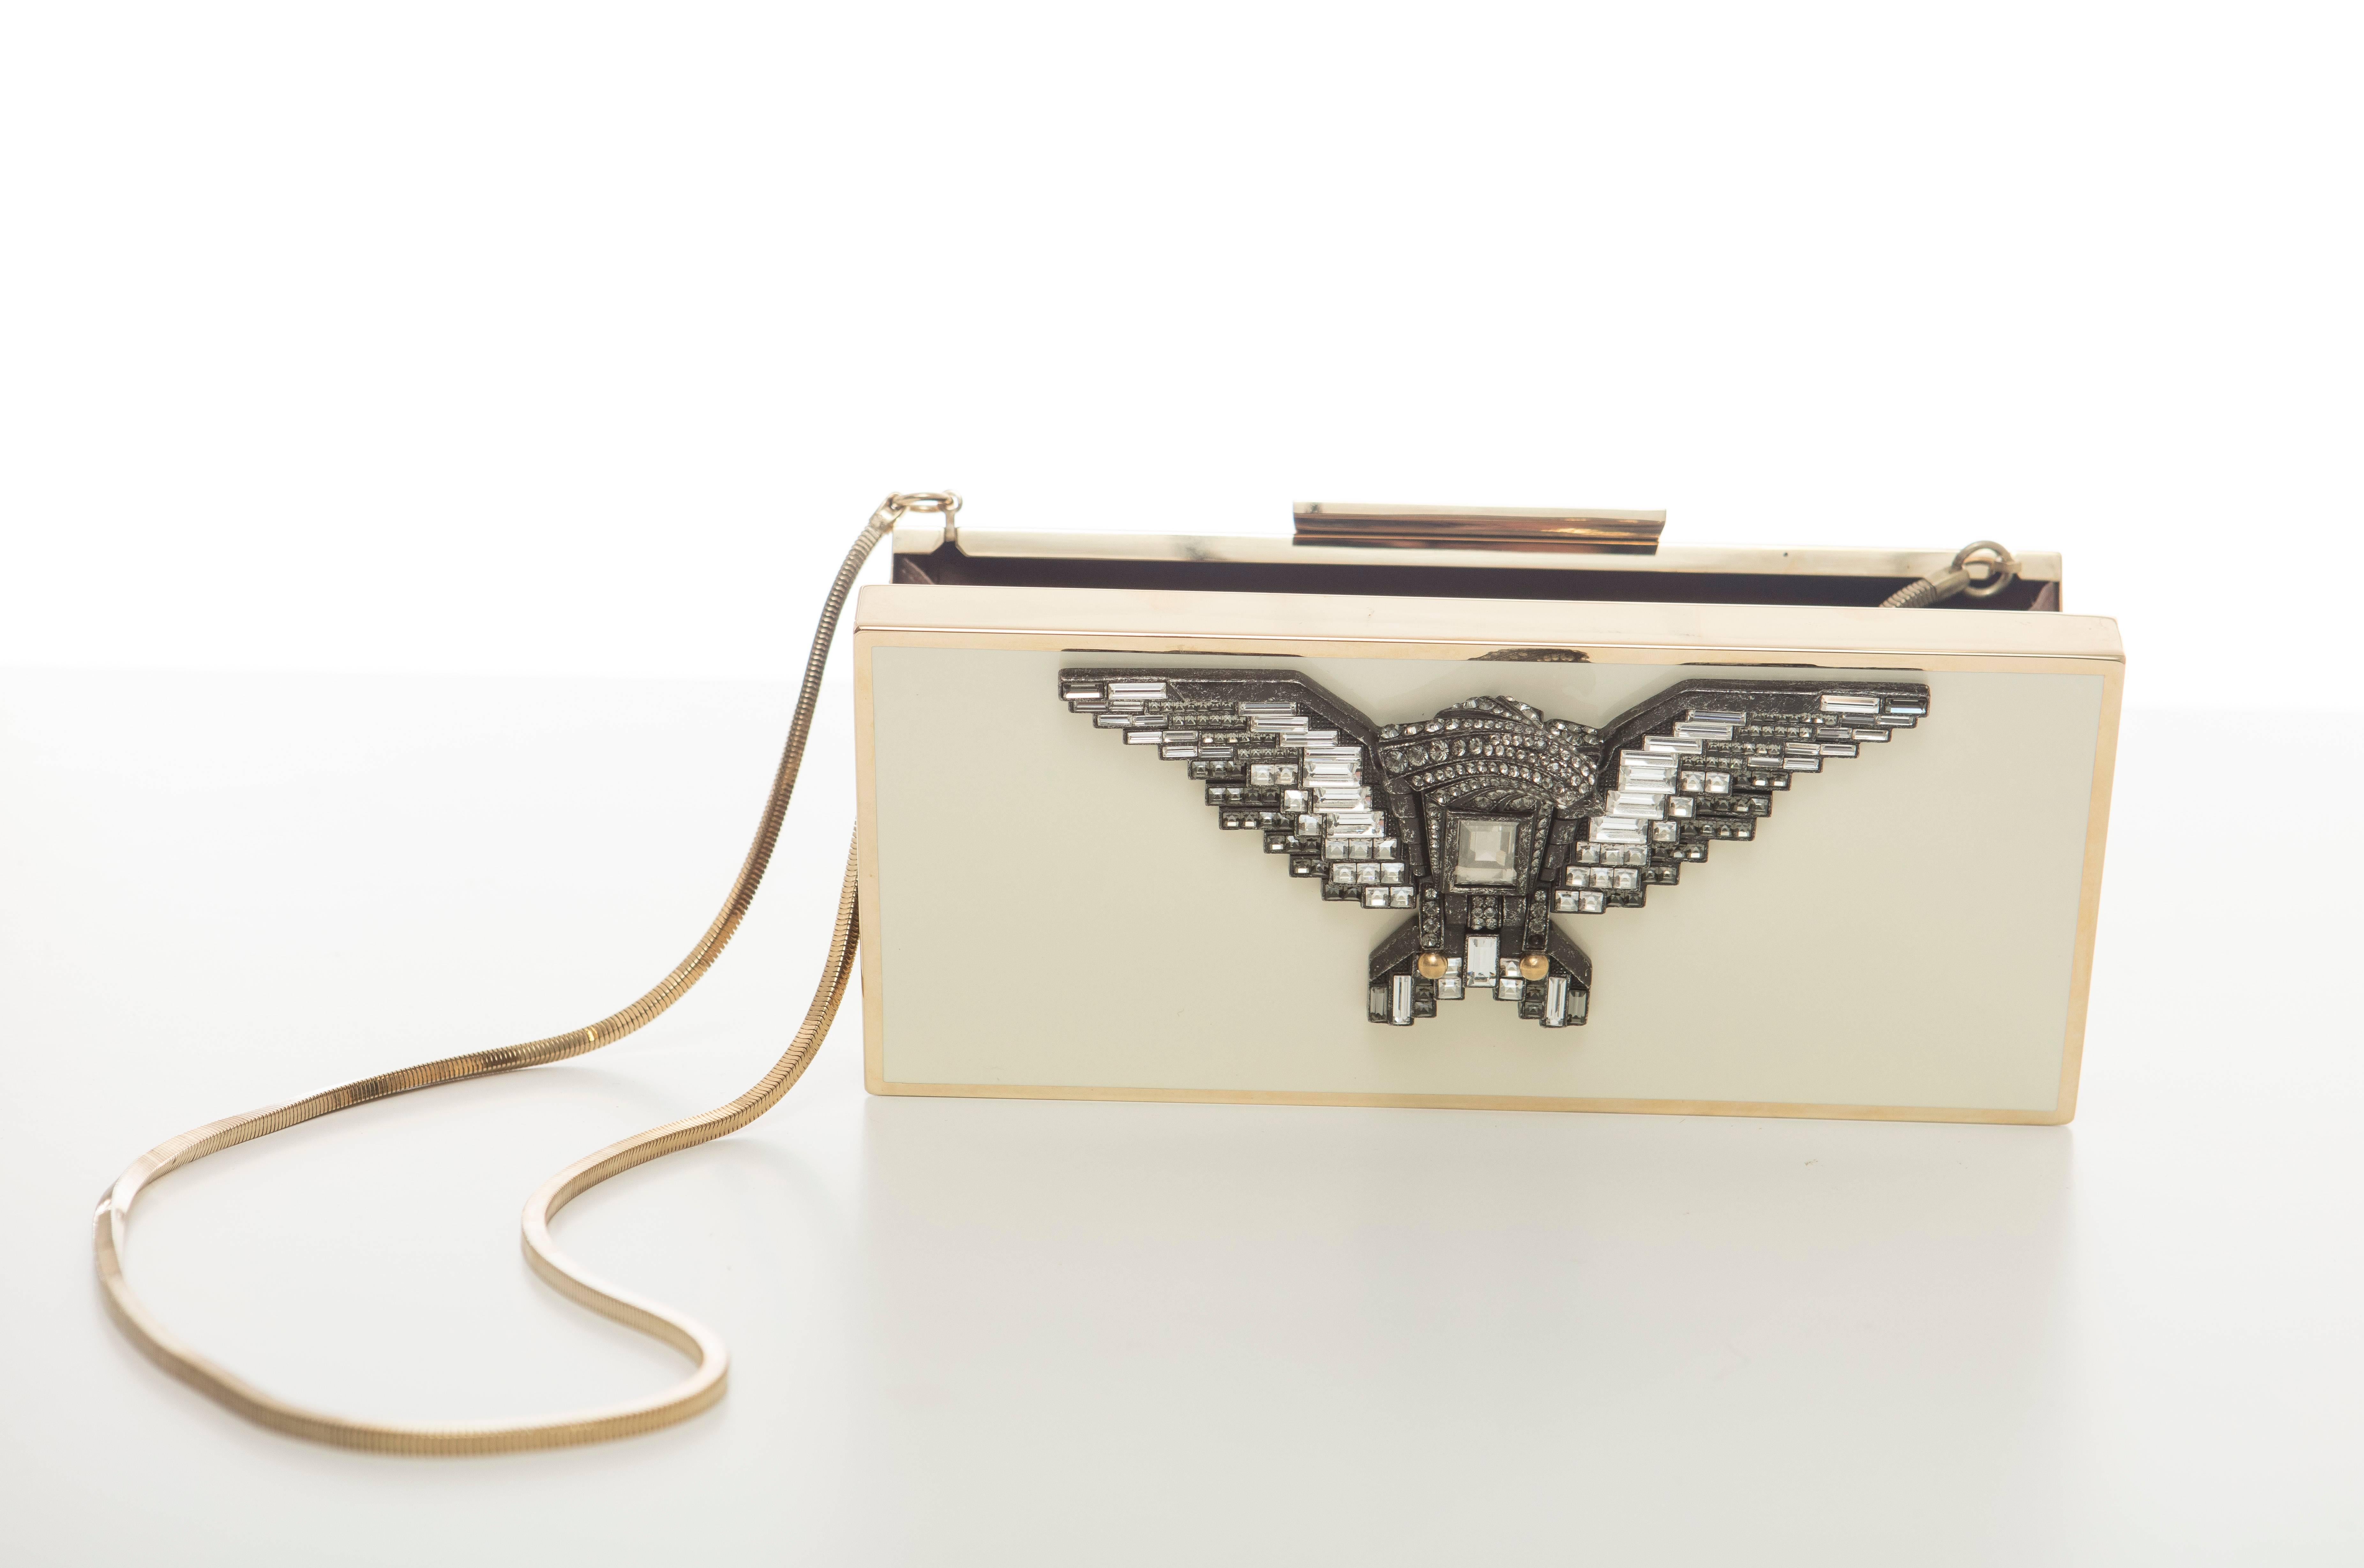 Alber Elbaz for Lanvin, Spring-Summer 2012 cream acrylic clutch with gold-tone hardware, single drop-in shoulder strap with chain-link accent, gunmetal and clear swarovski crystal embellished eagle at front face, brown satin lining and magnetic